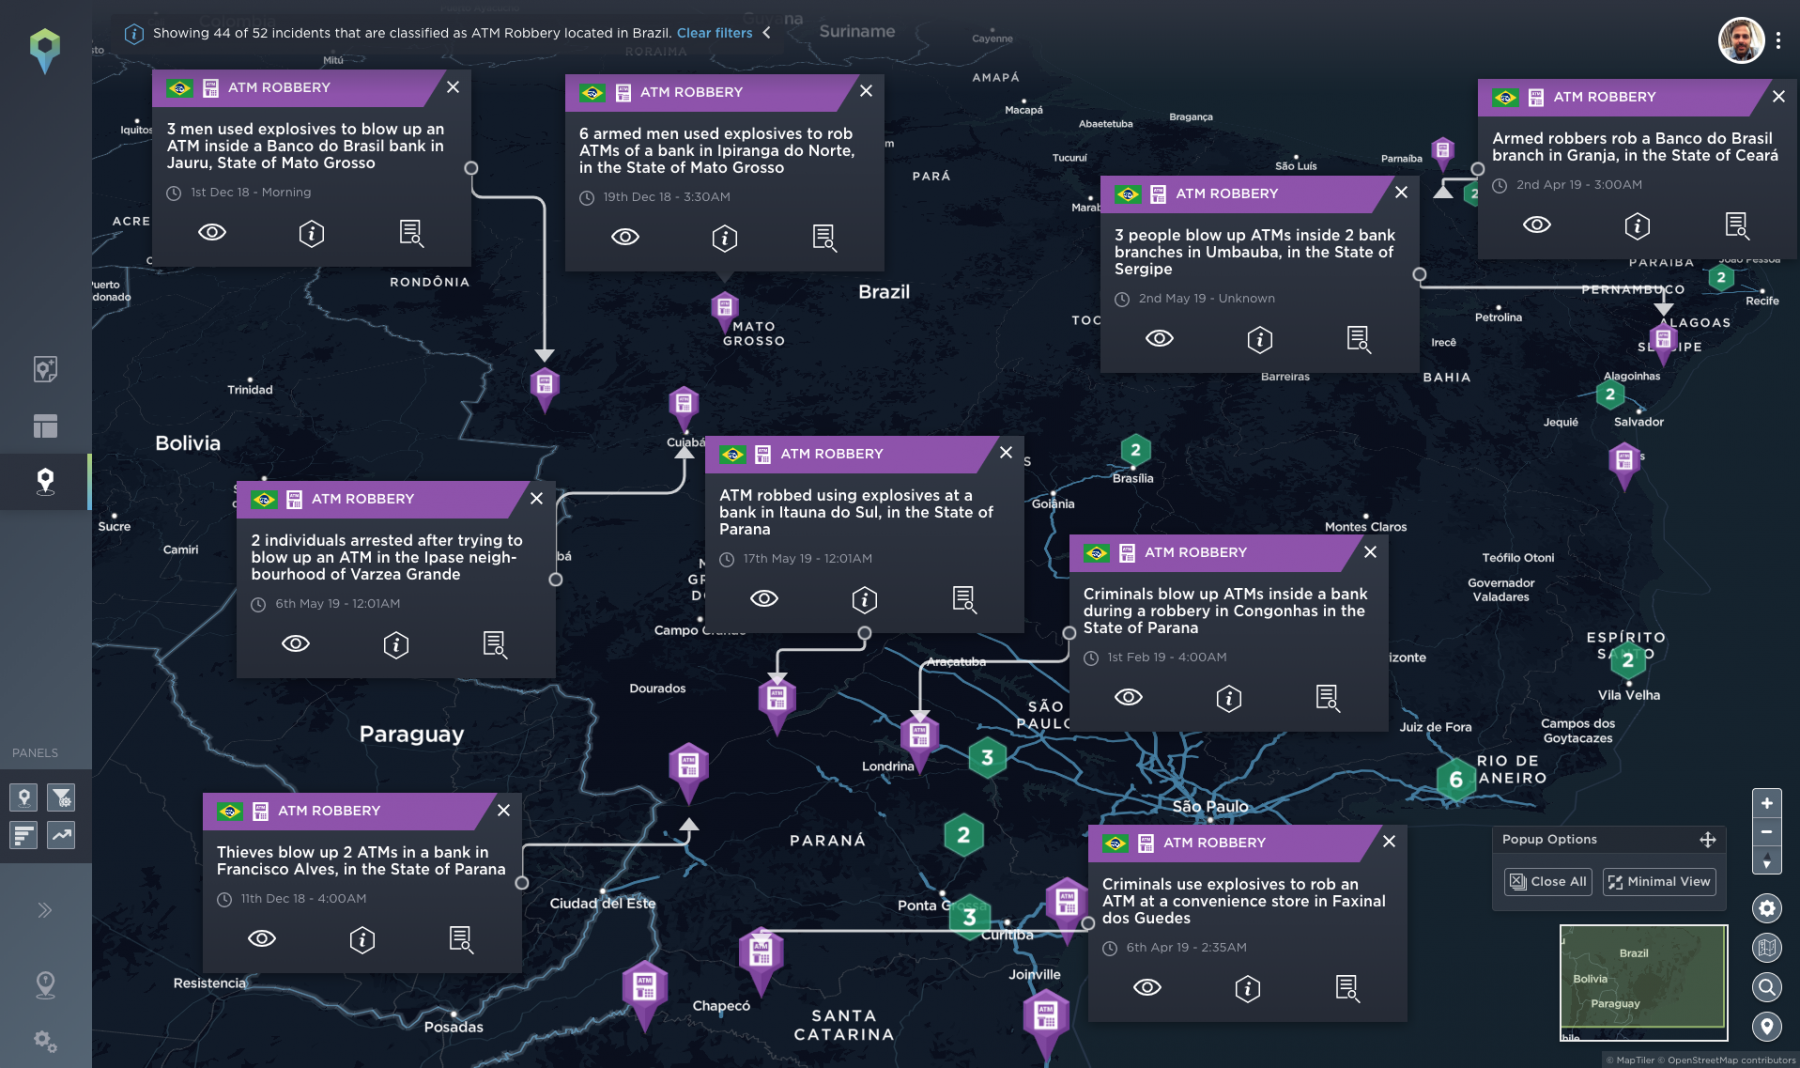 Incidents of ATM robbery using explosives in Brazil 2019